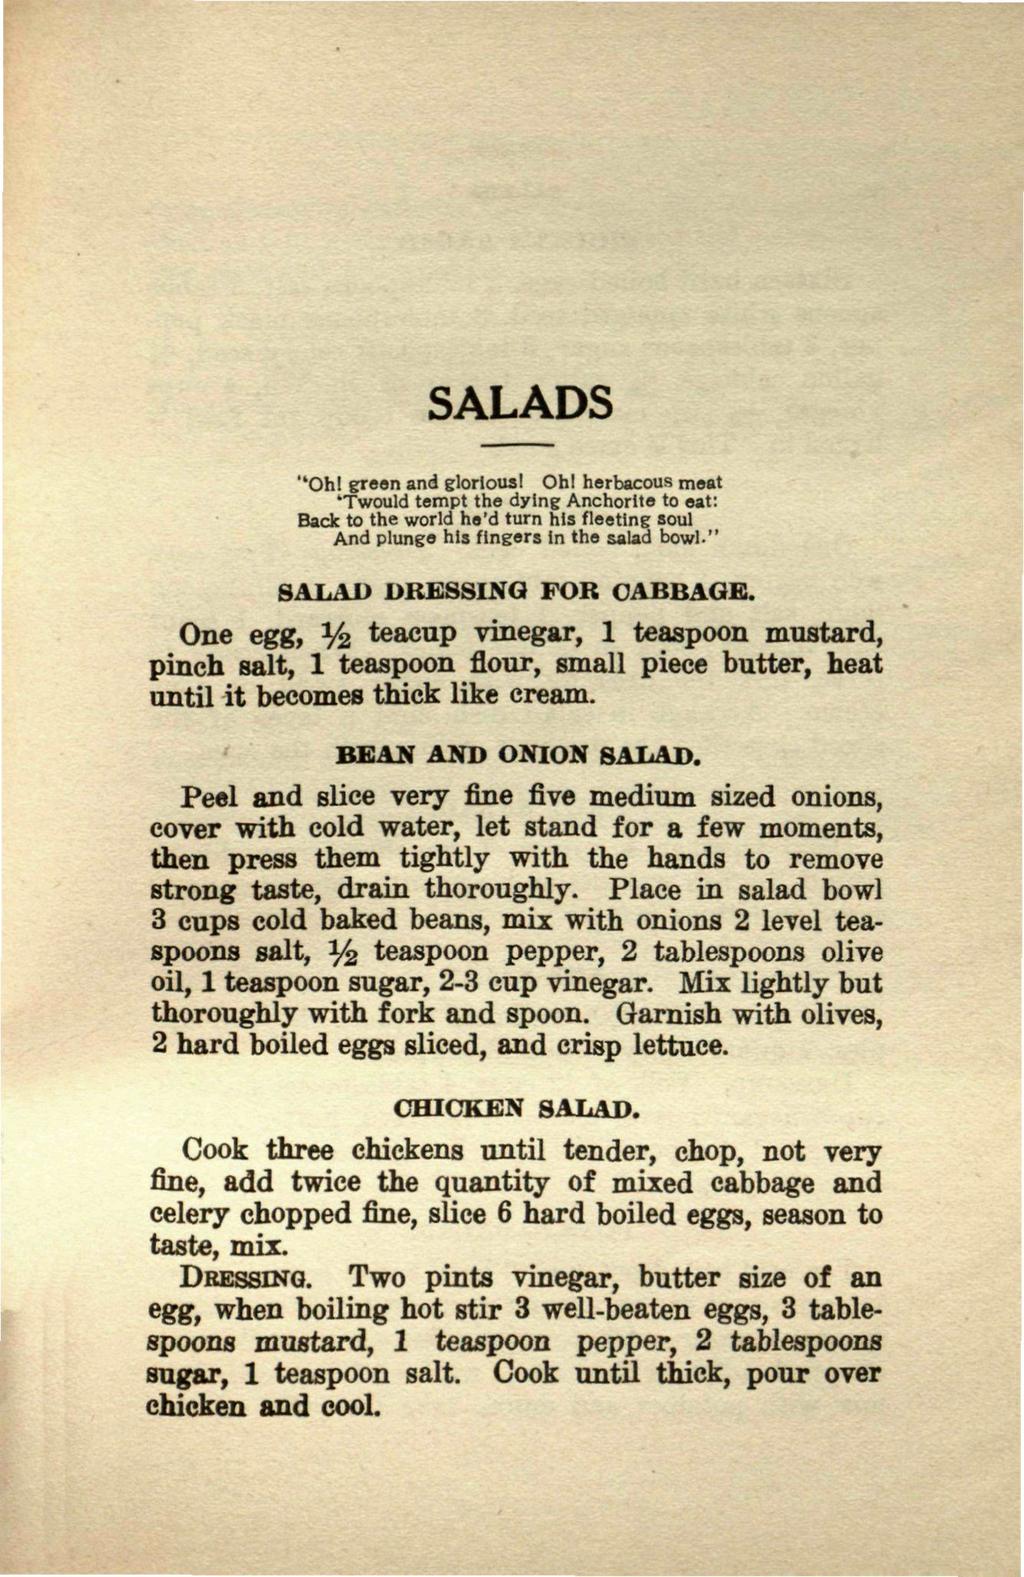 SALADS "Oh! green and glorious! Oh!